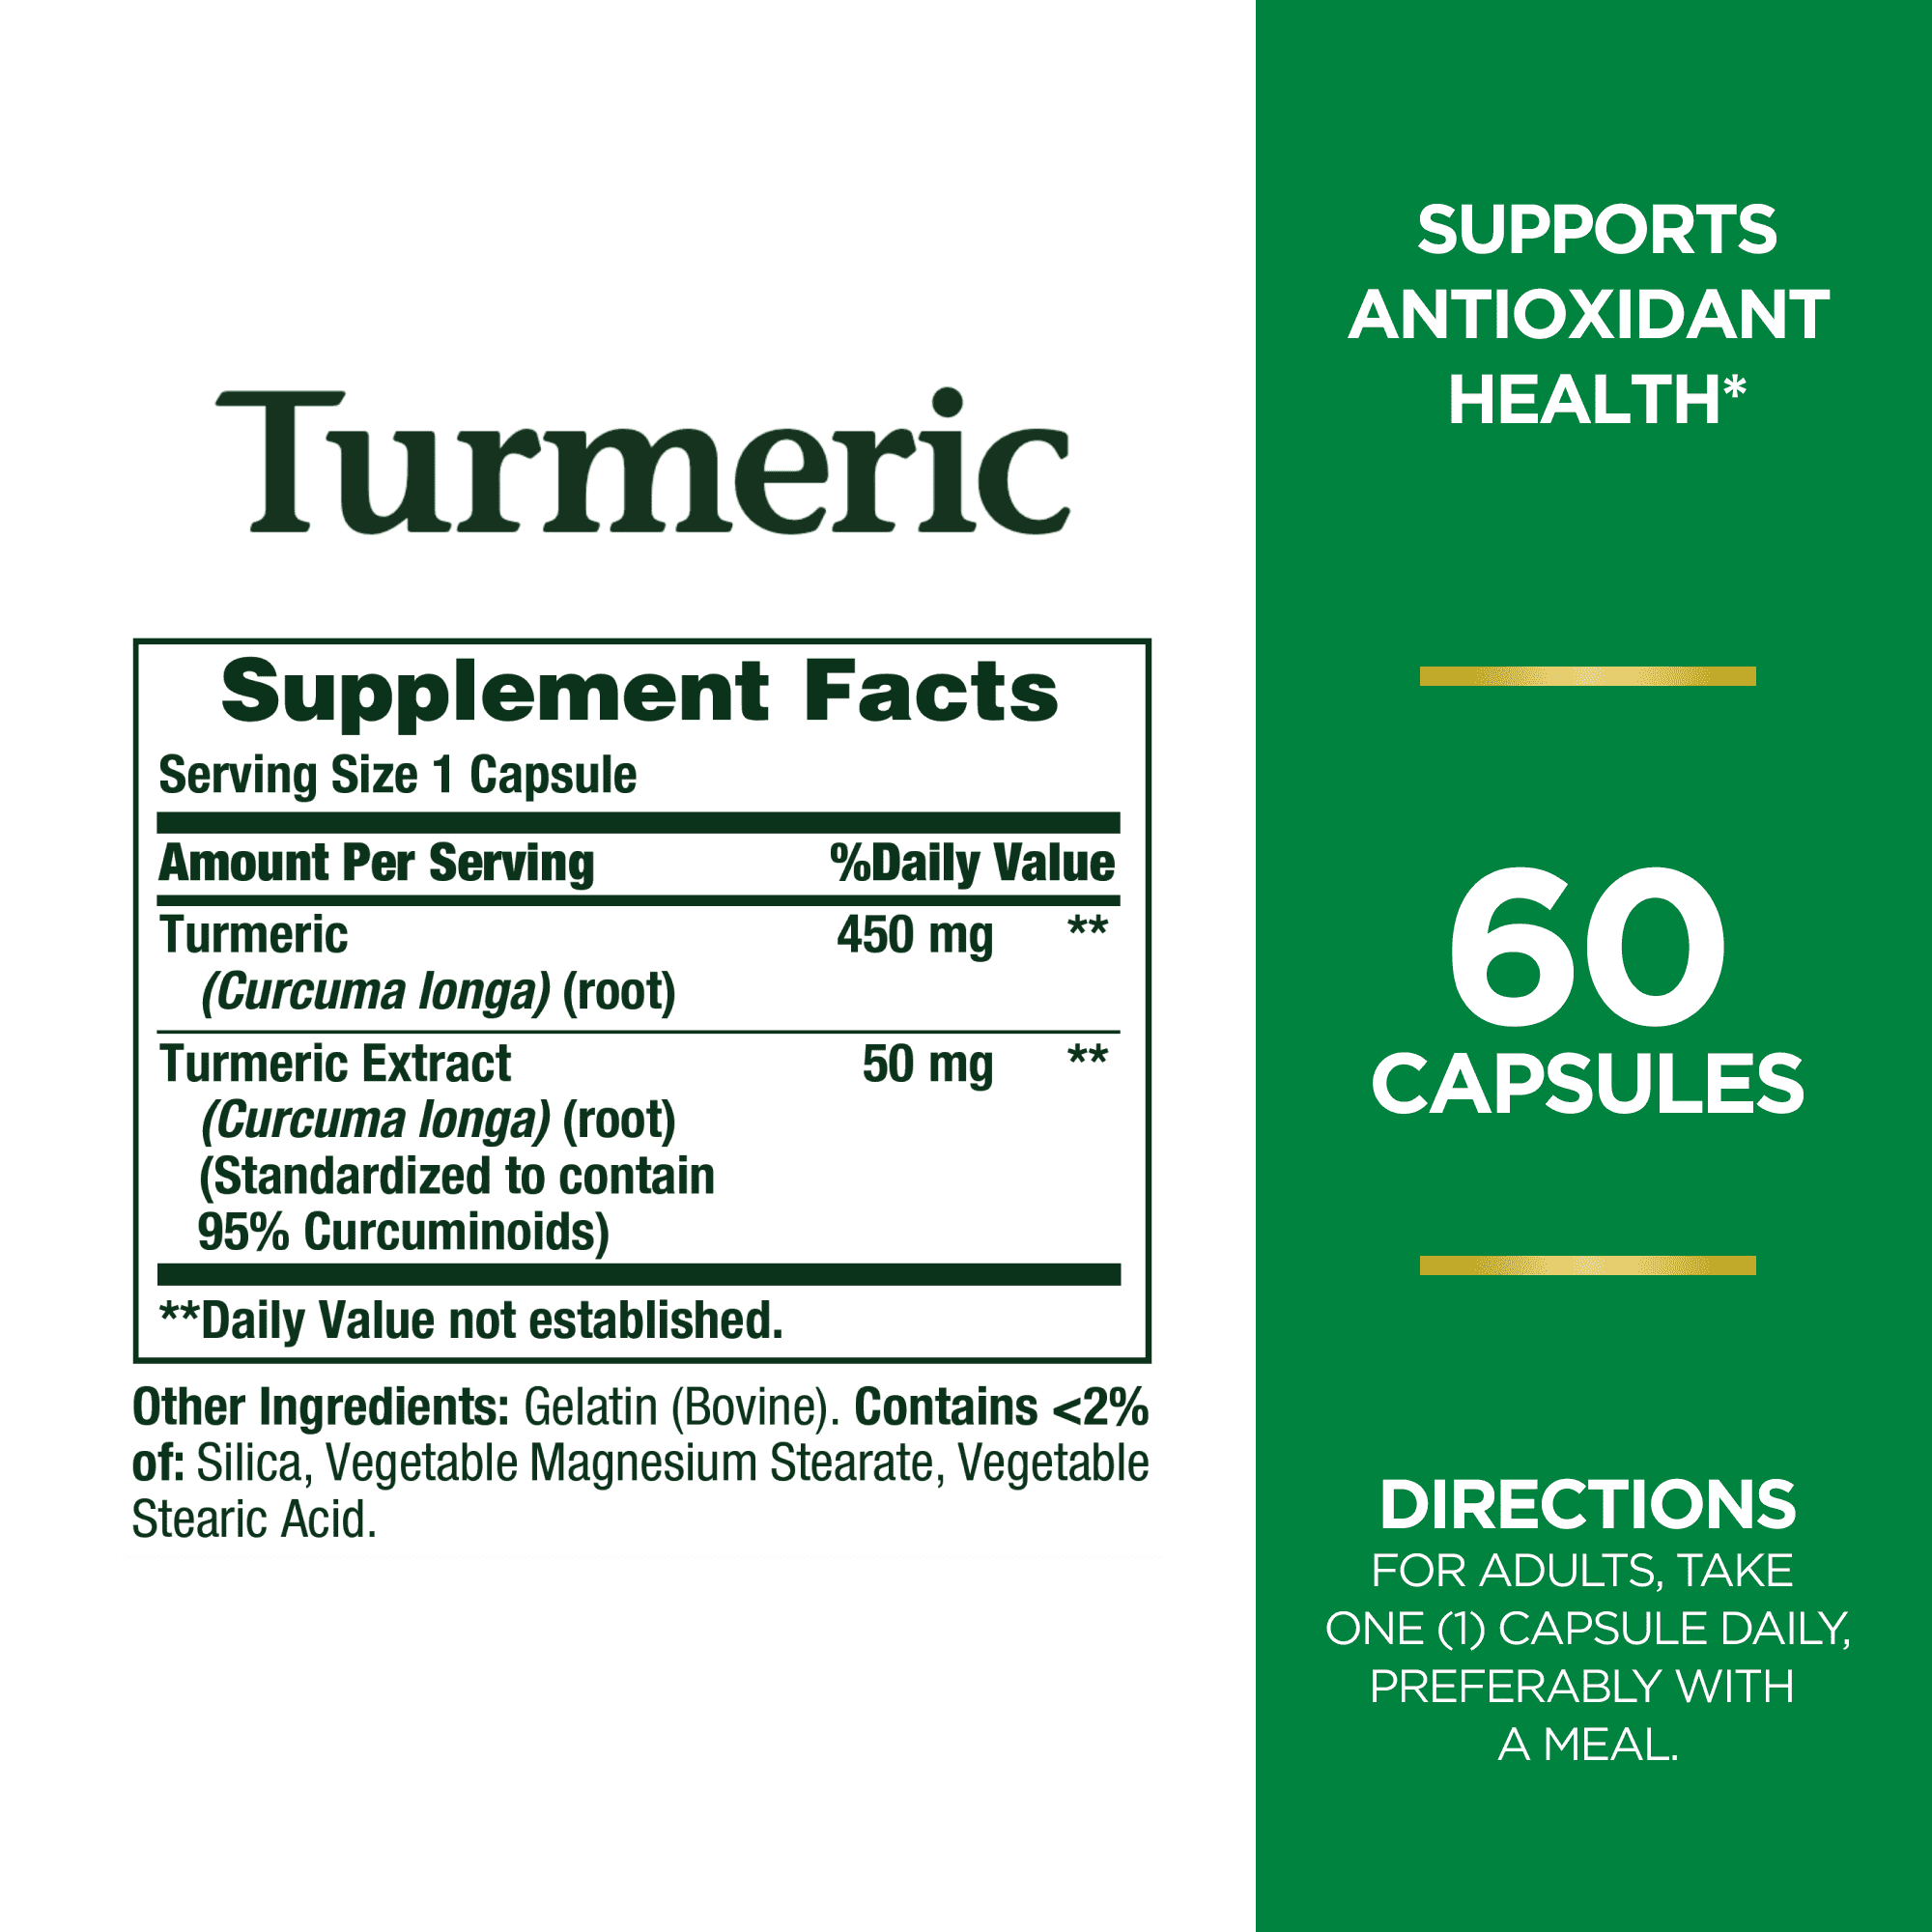 Nature's Bounty Turmeric 450 mg Capsules for Antioxidant Health, 60 Ct - image 2 of 5